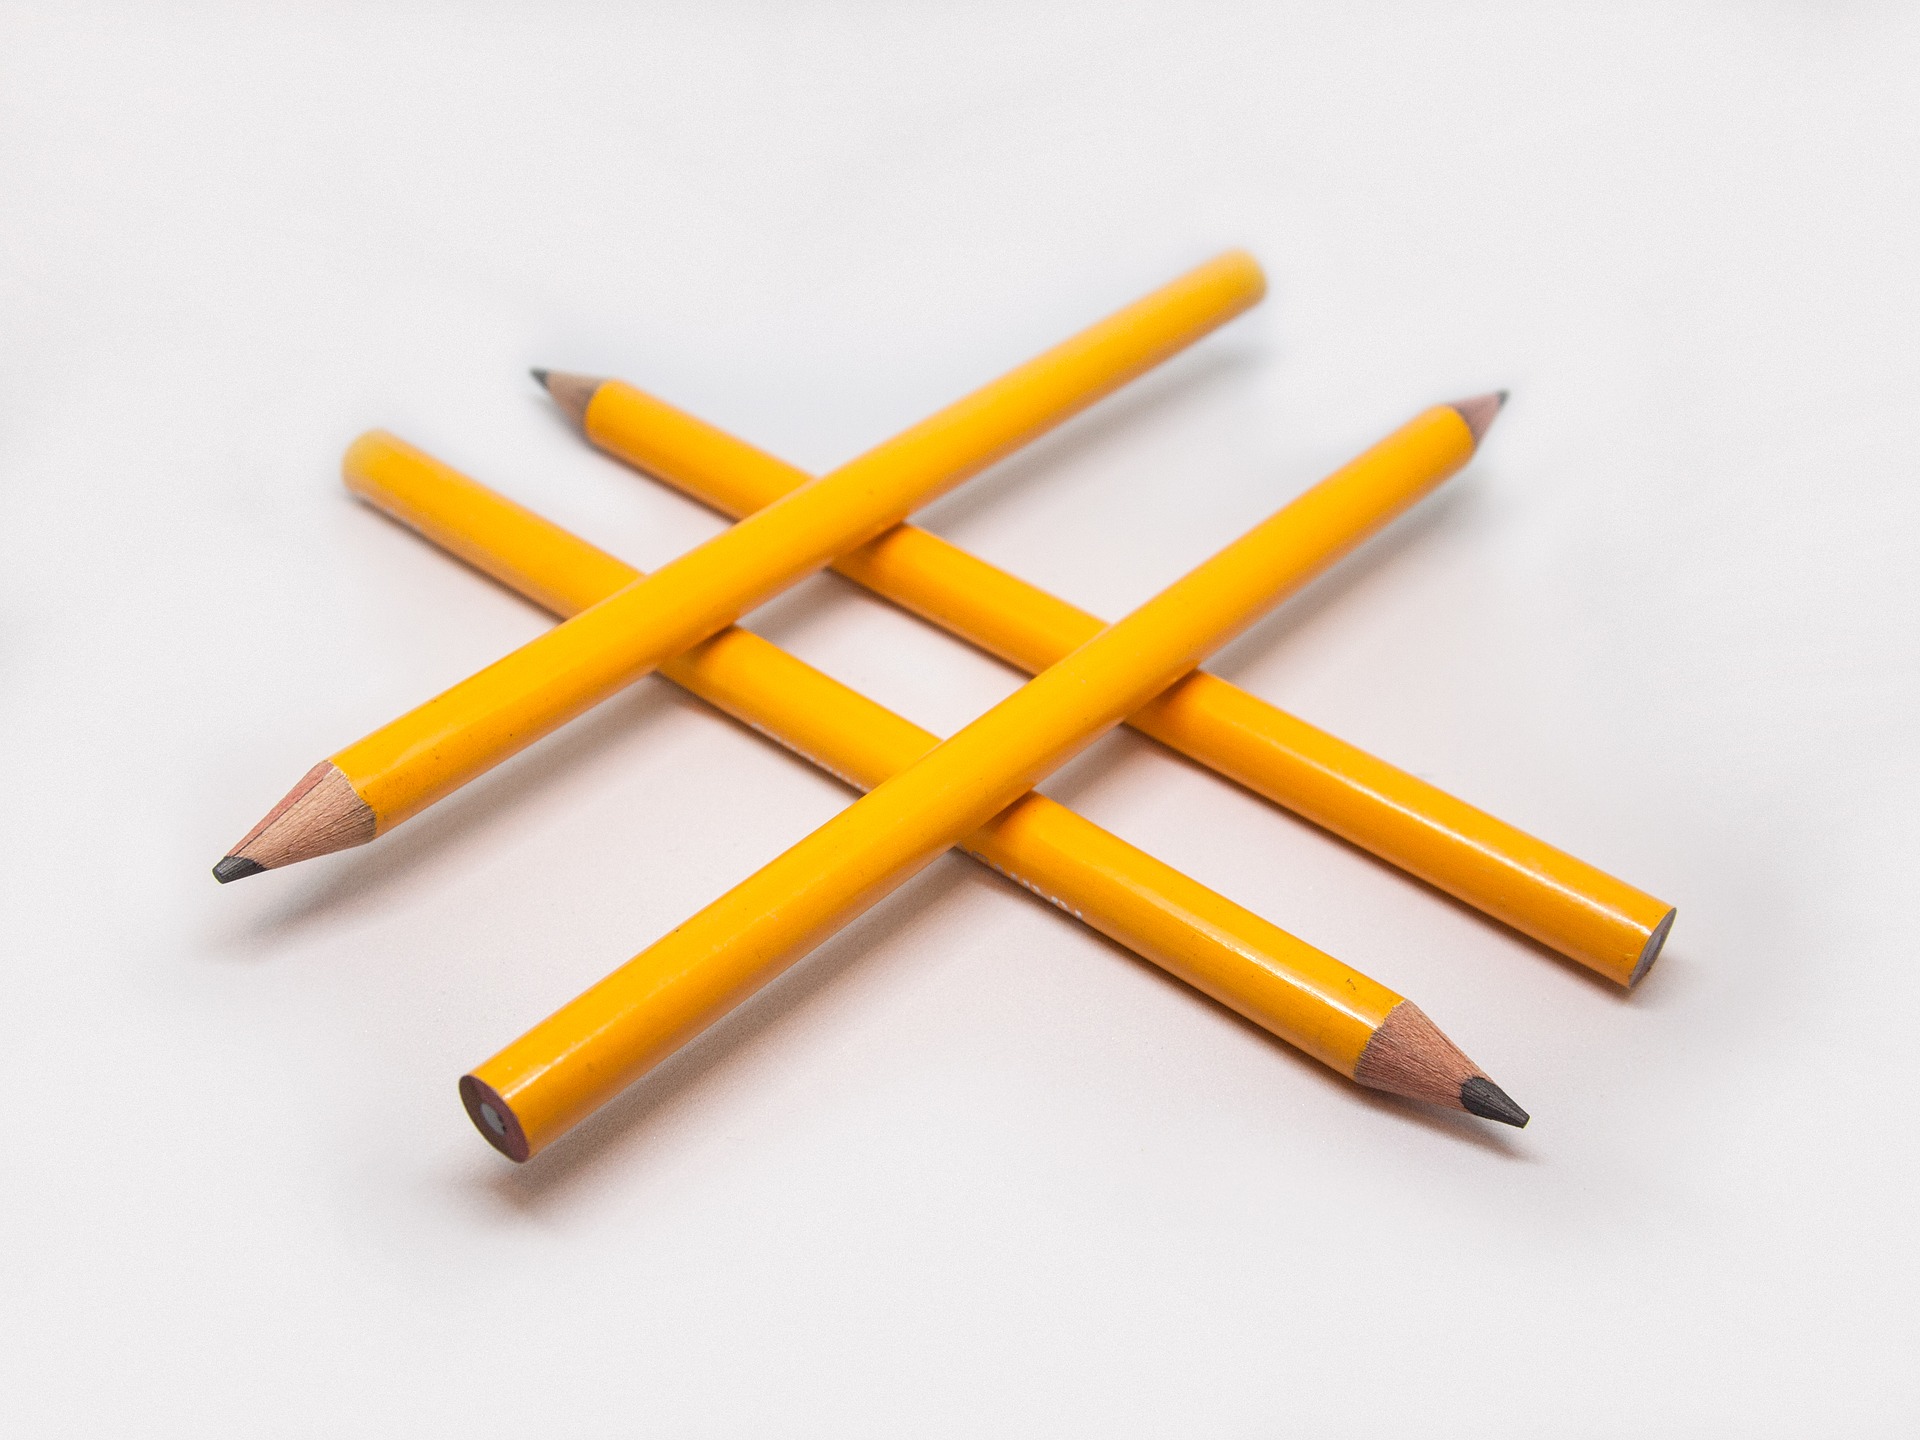 Four pencils forming a hashtag